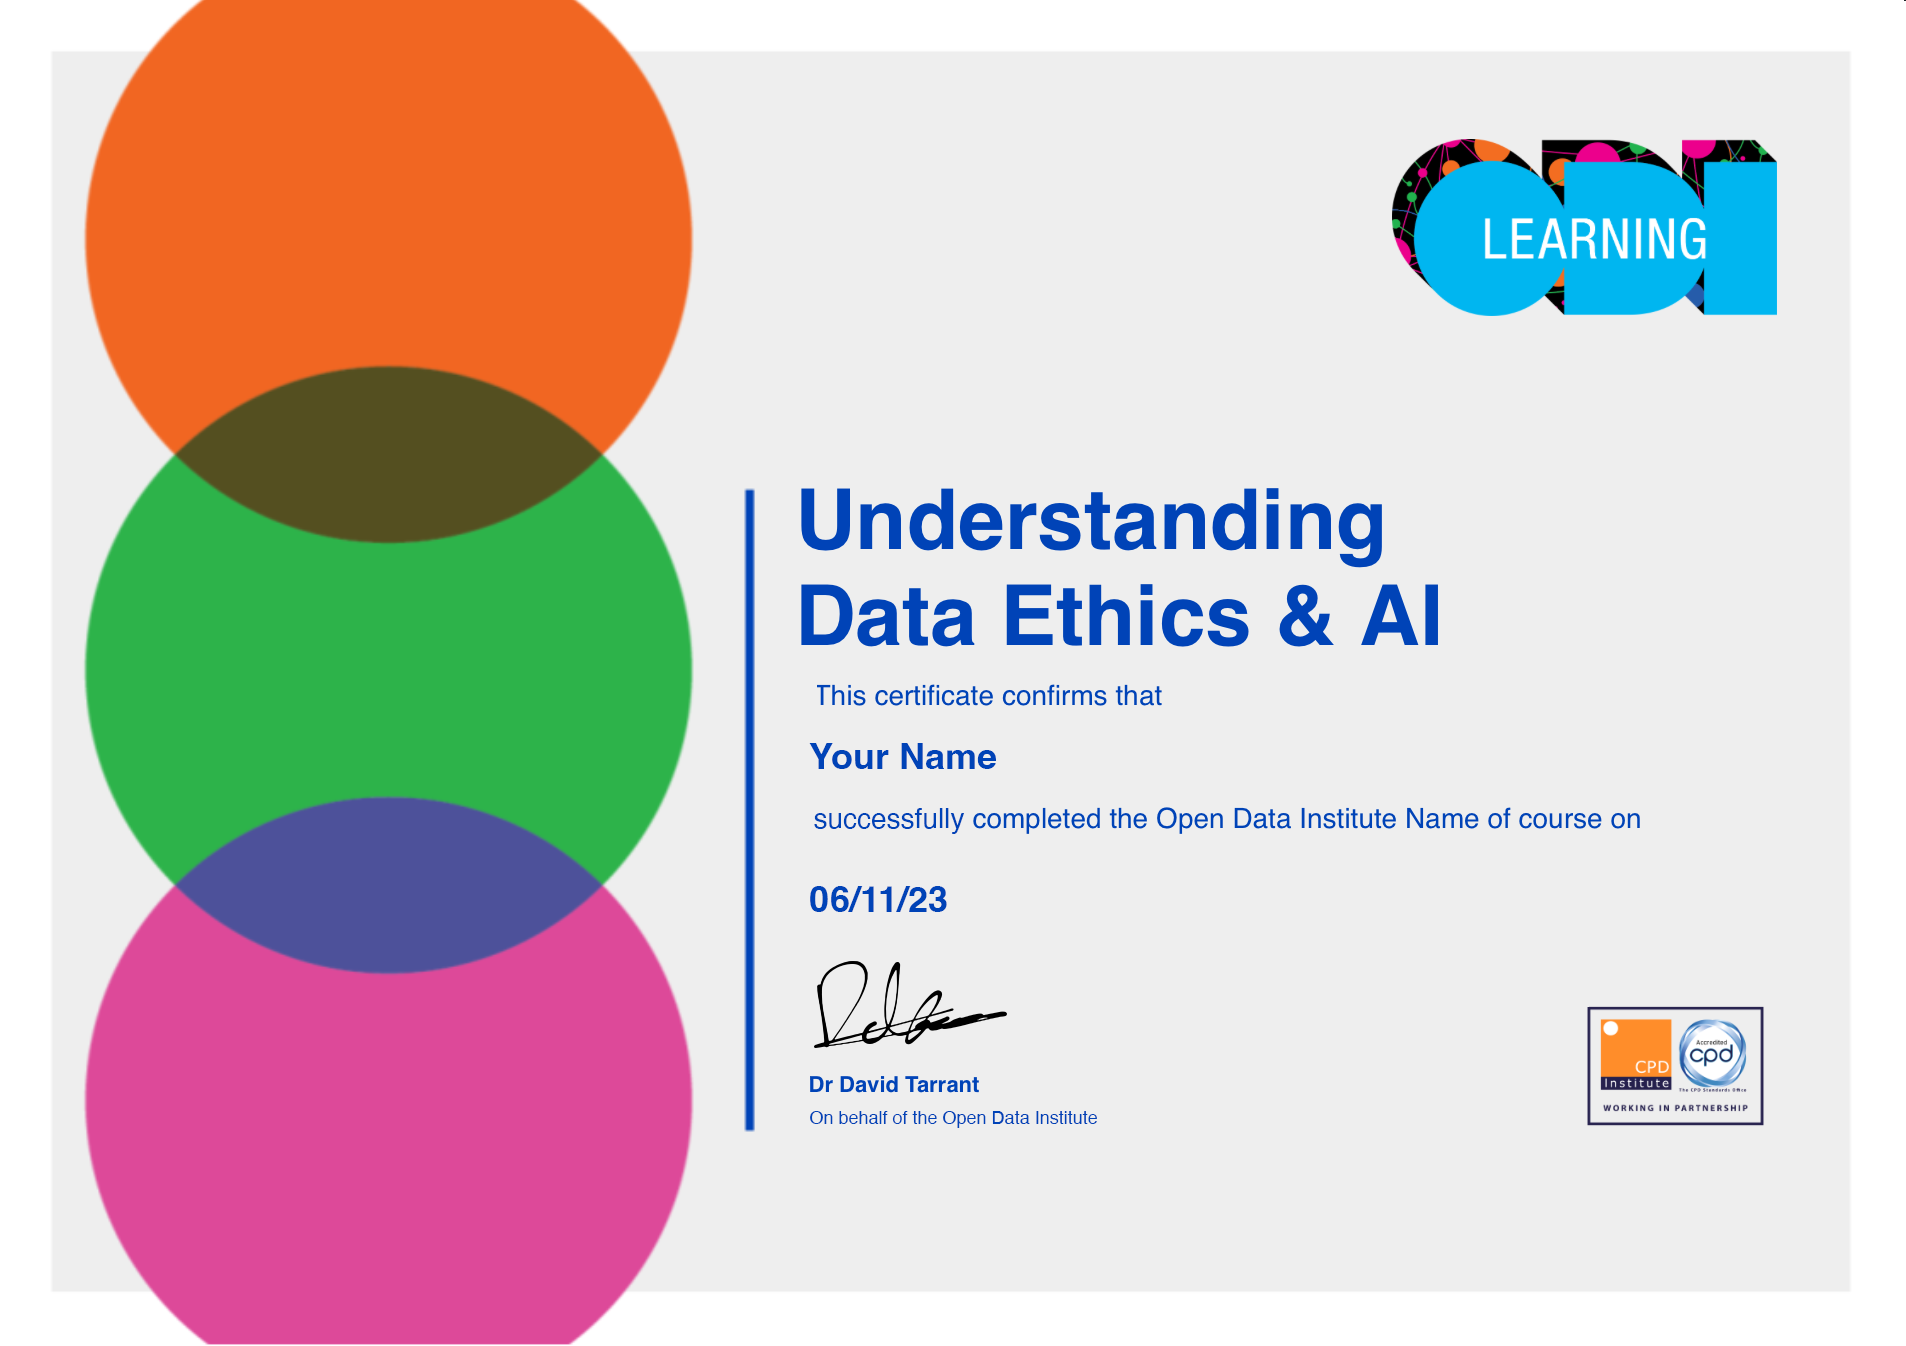 understanding data ethics and AI completion certificate